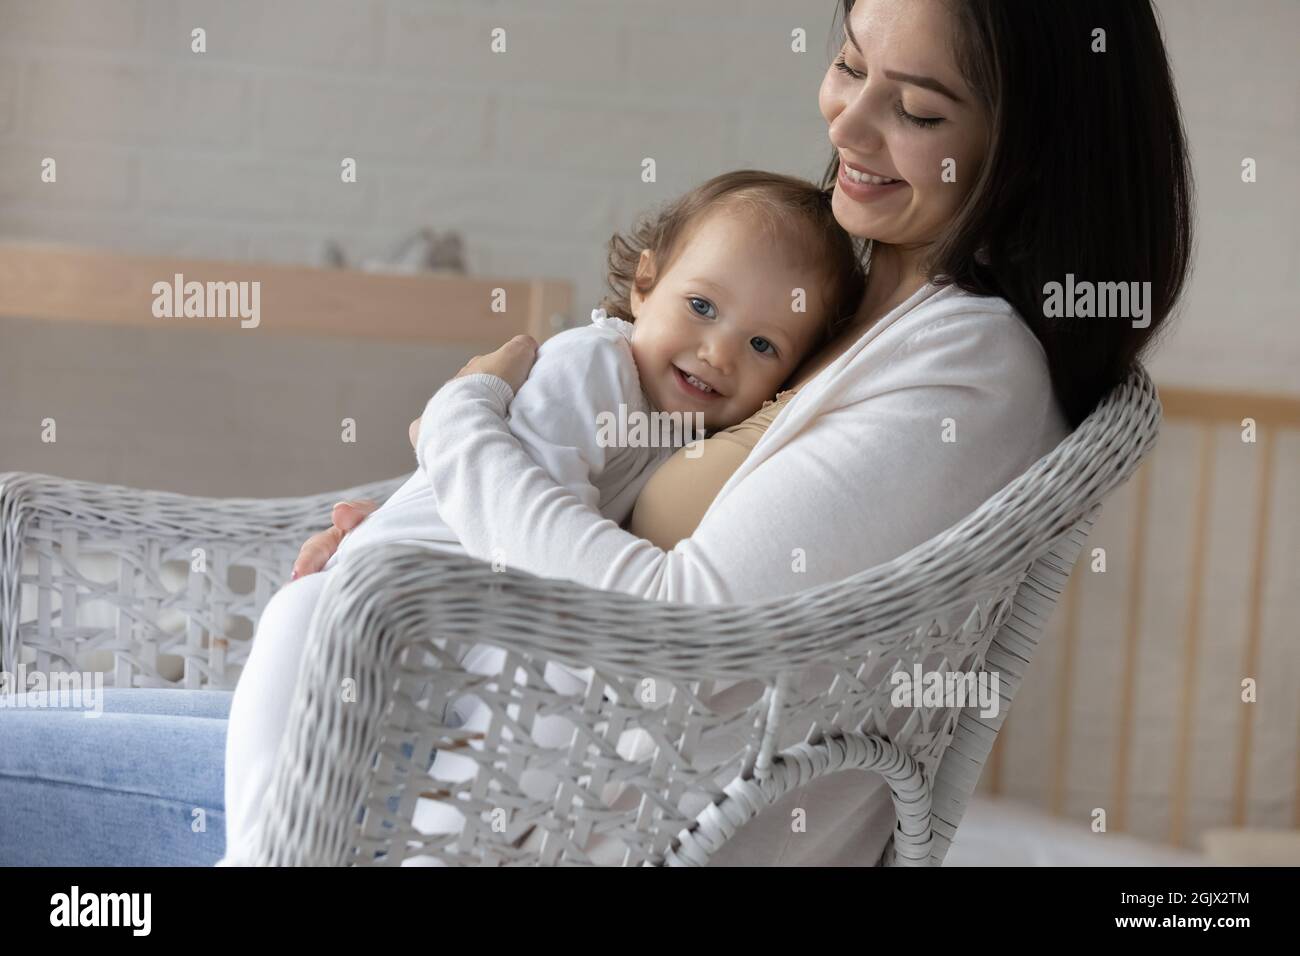 Smiling young mom hugging and cuddling little baby daughter Stock Photo